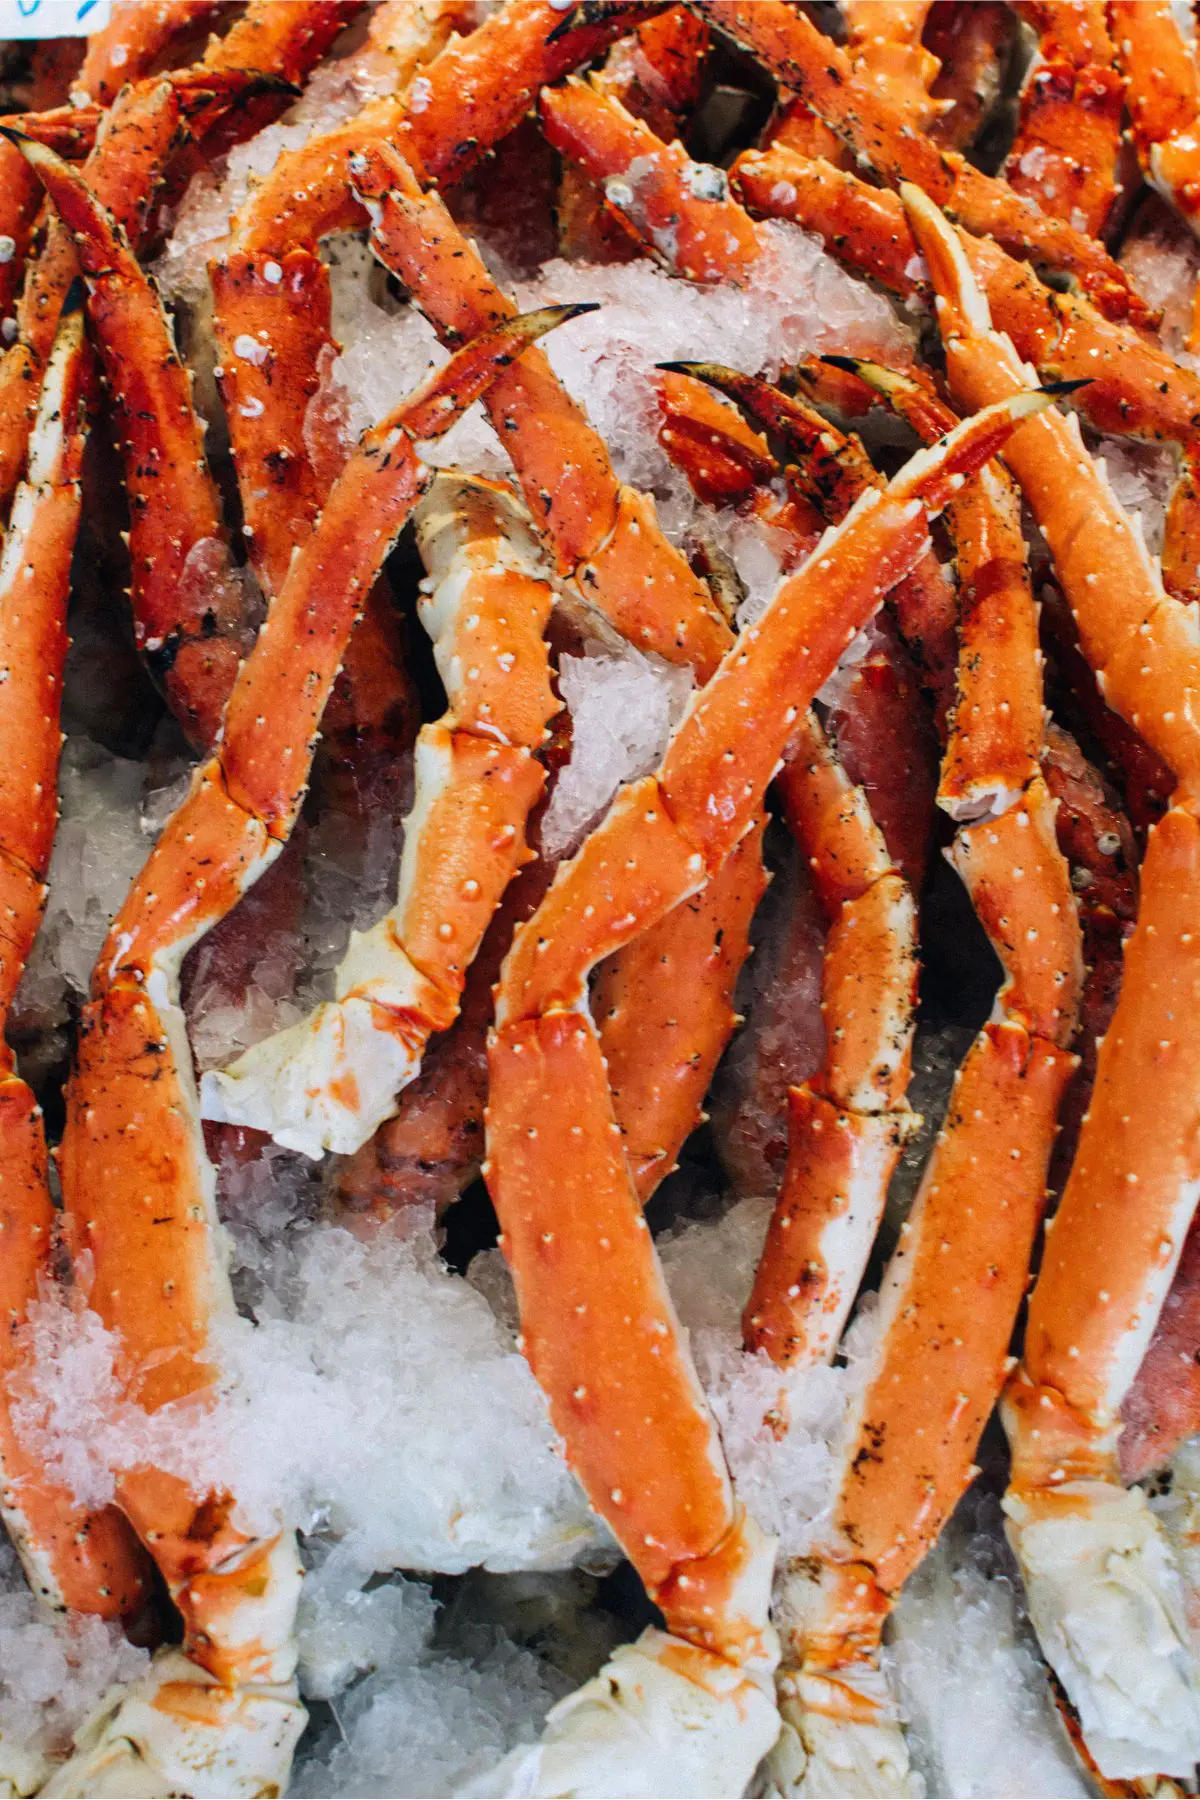 How Long Does Cooked And Uncooked Crab Last In The Fridge?